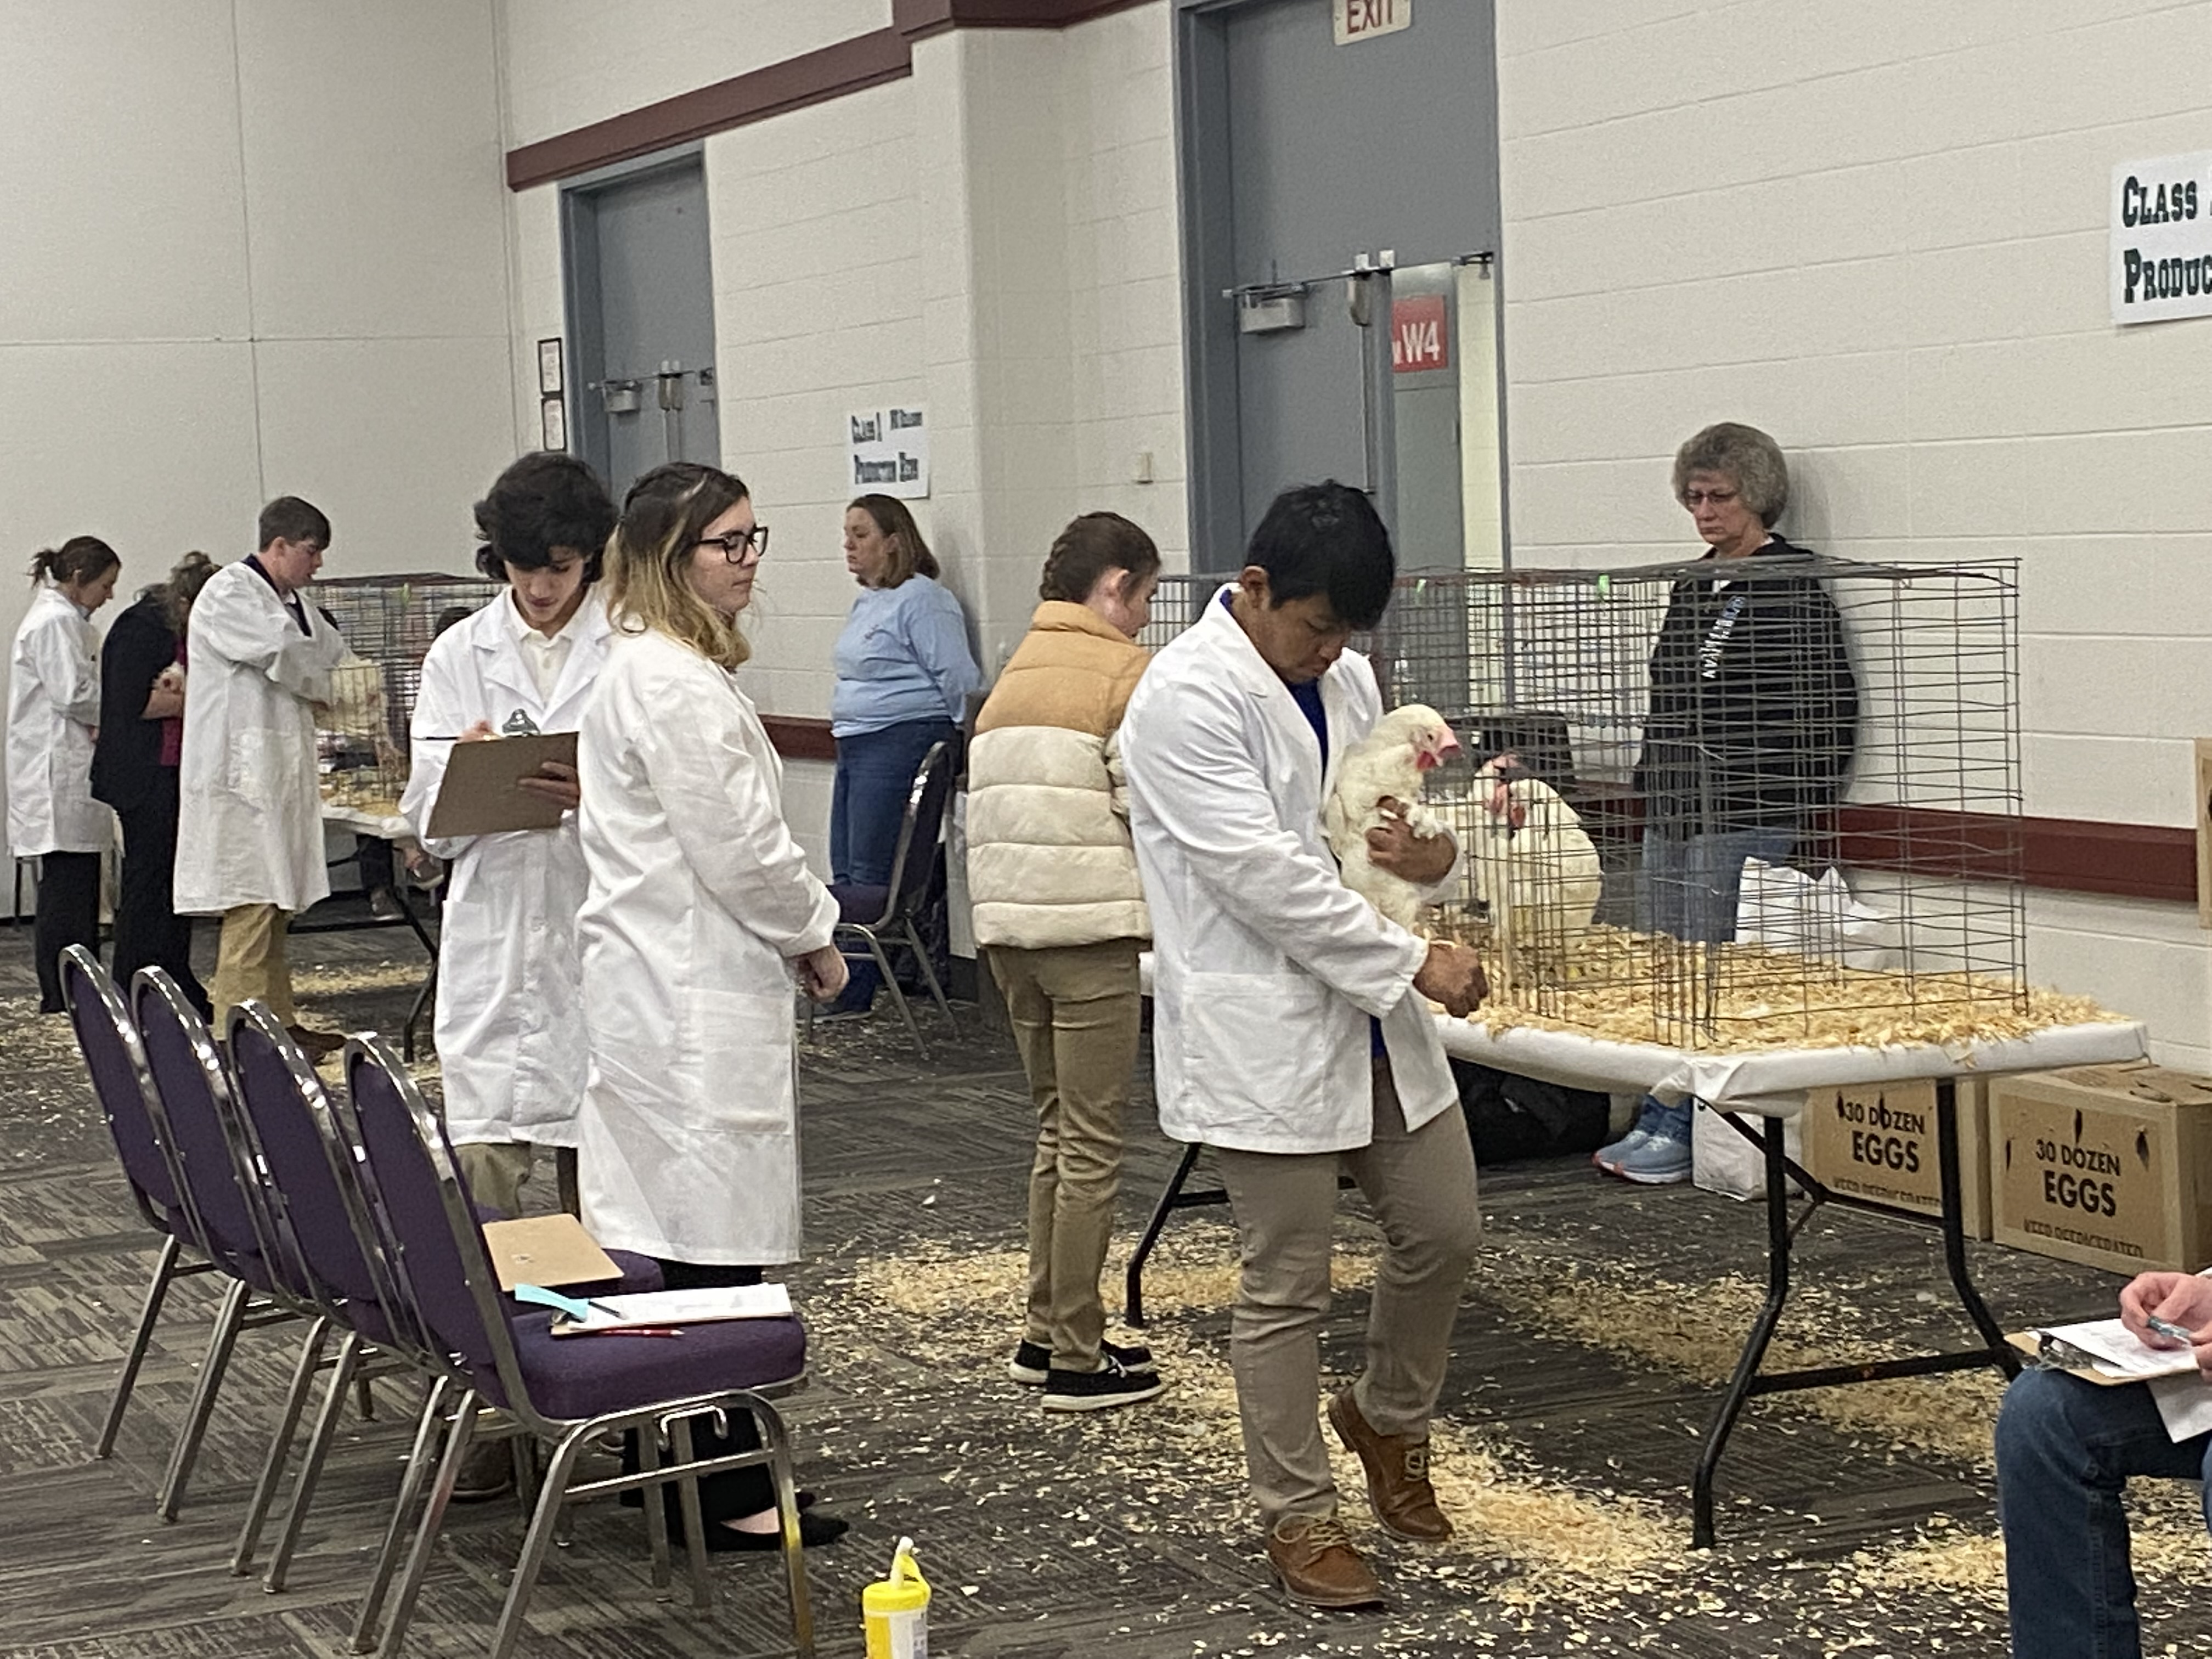 4-H youth judging hens